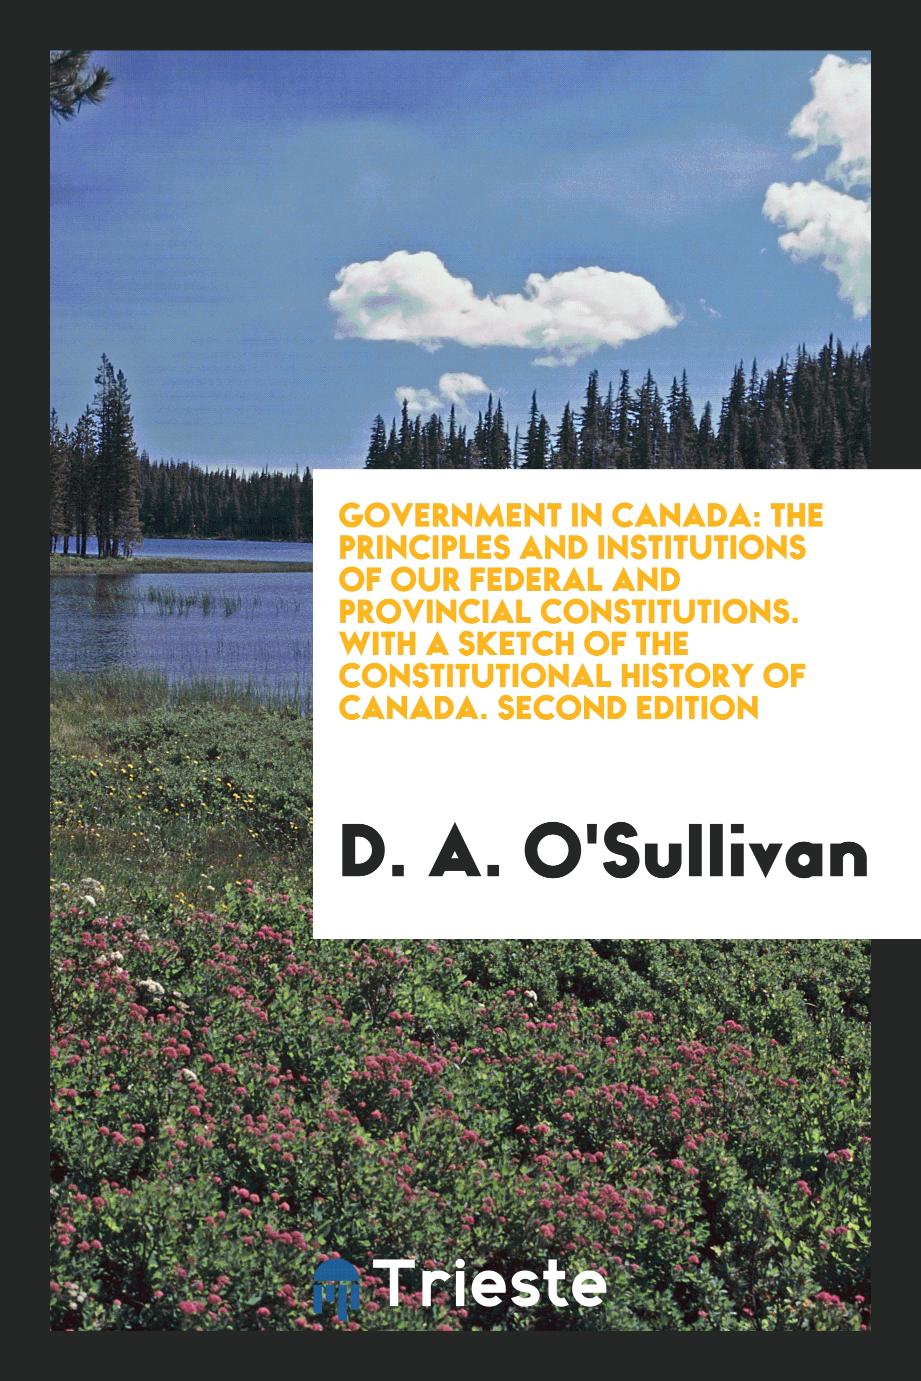 Government in Canada: The Principles and Institutions of Our Federal and Provincial Constitutions. With a Sketch of the Constitutional History of Canada. Second Edition